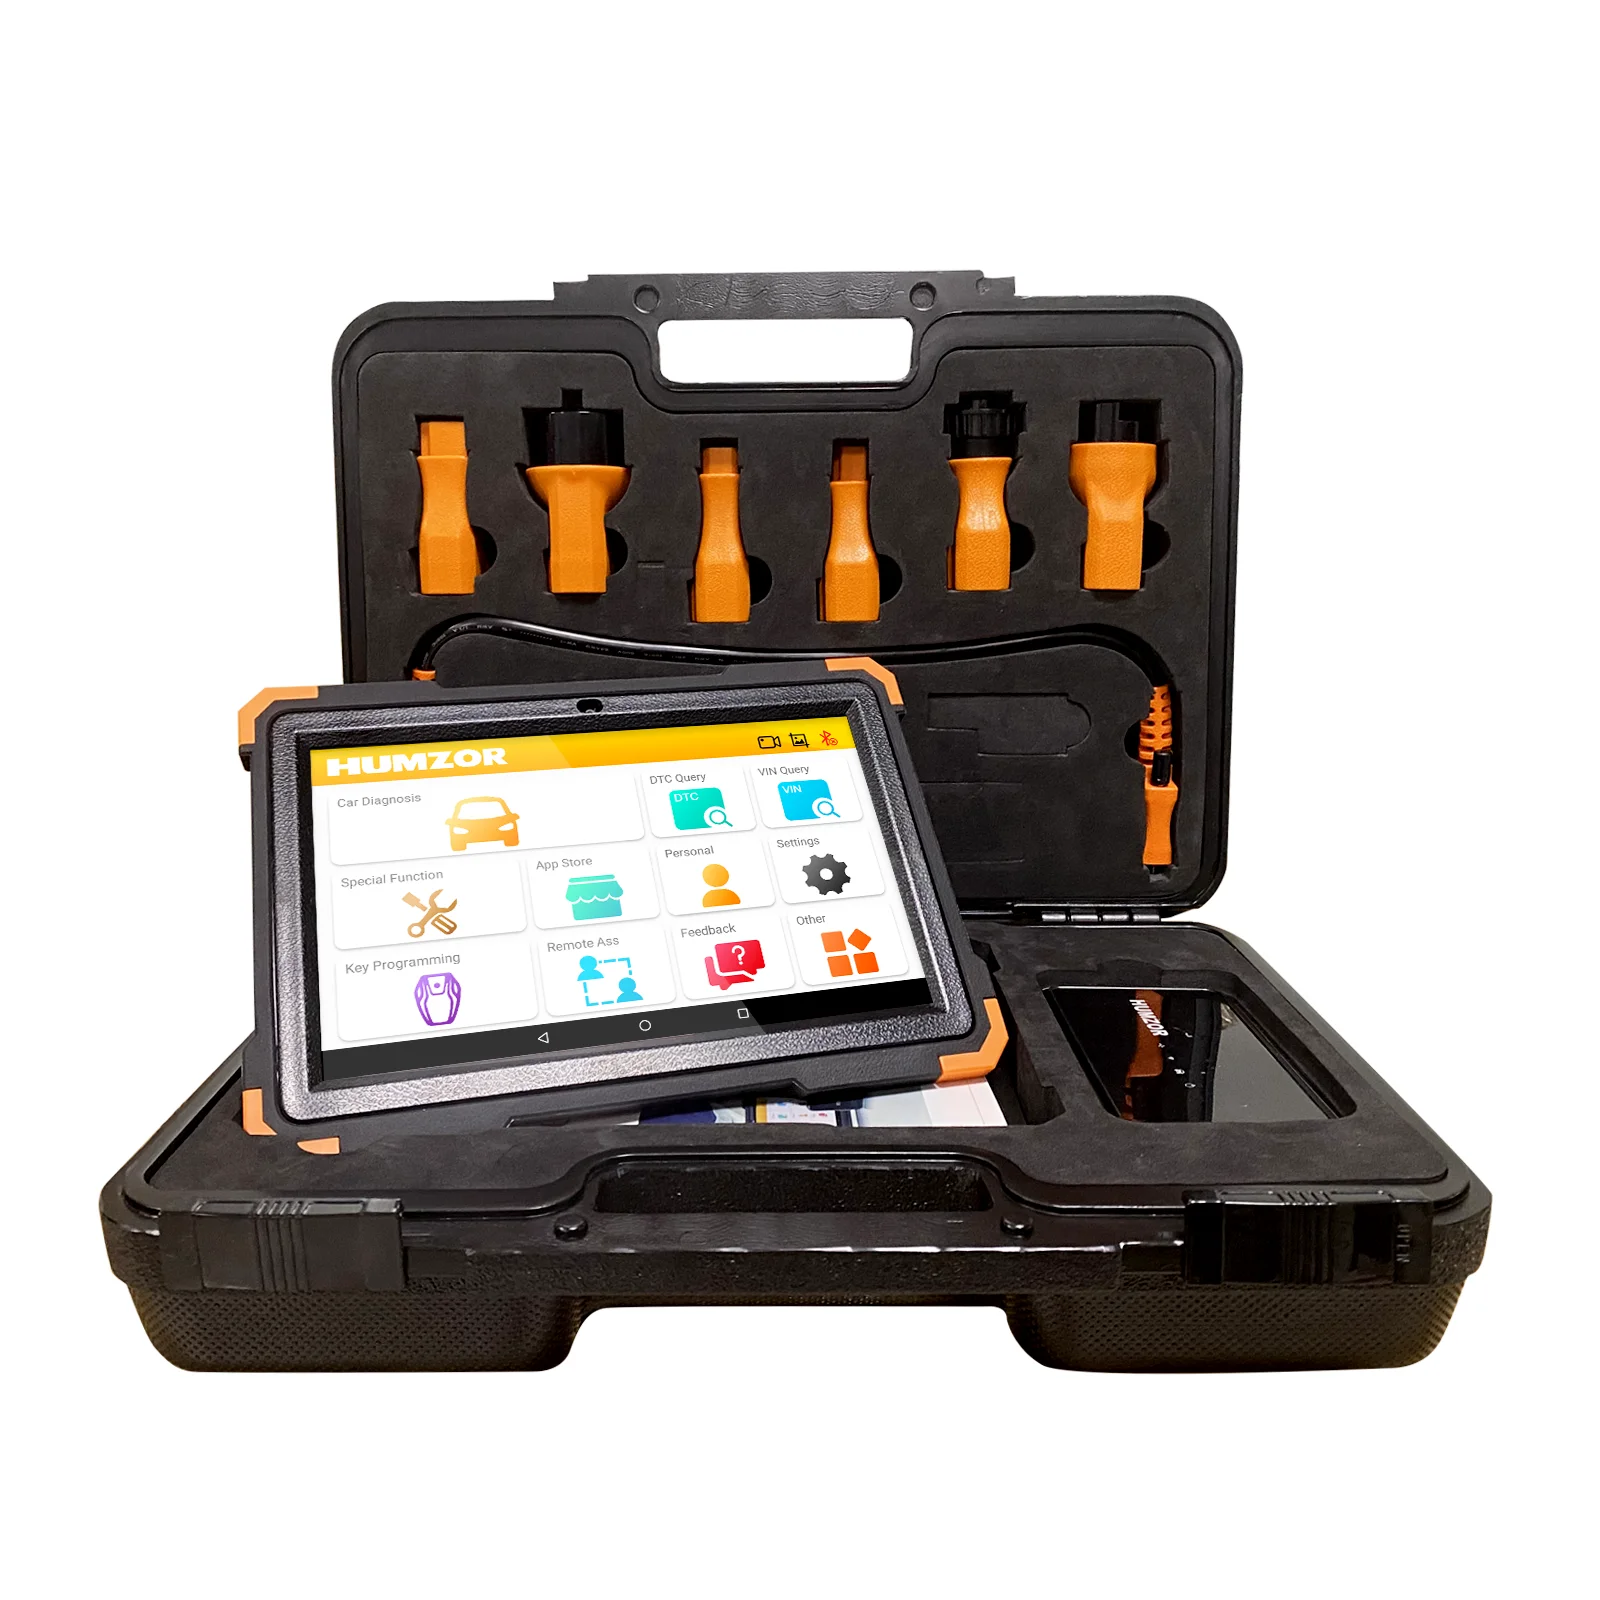 

New Arrival Humzor Nexz SYS NS366S Diagnostic Tools Car Full System Scan With 13 Special Fumctions OBD2 tools